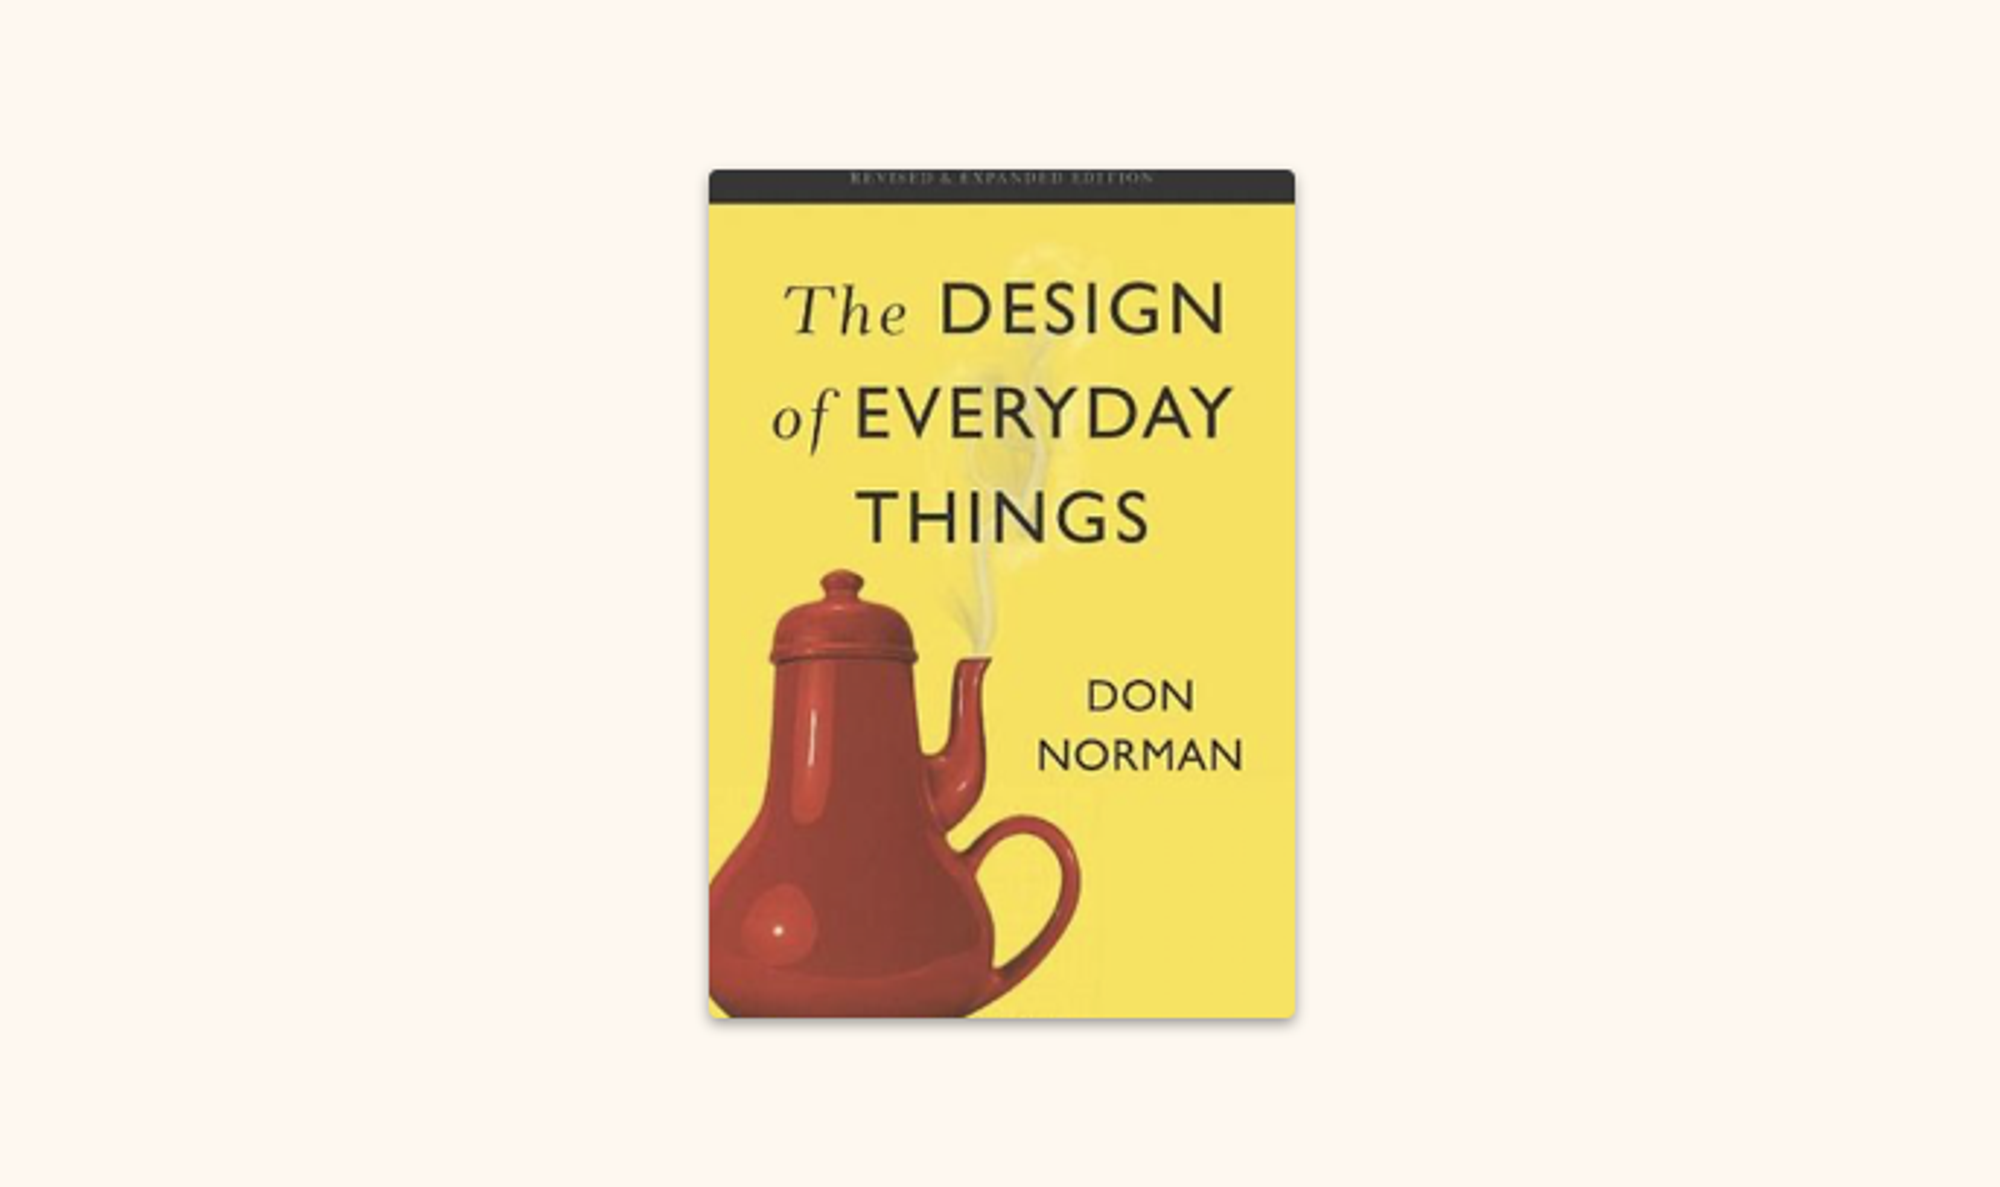 The Design of Everday Things